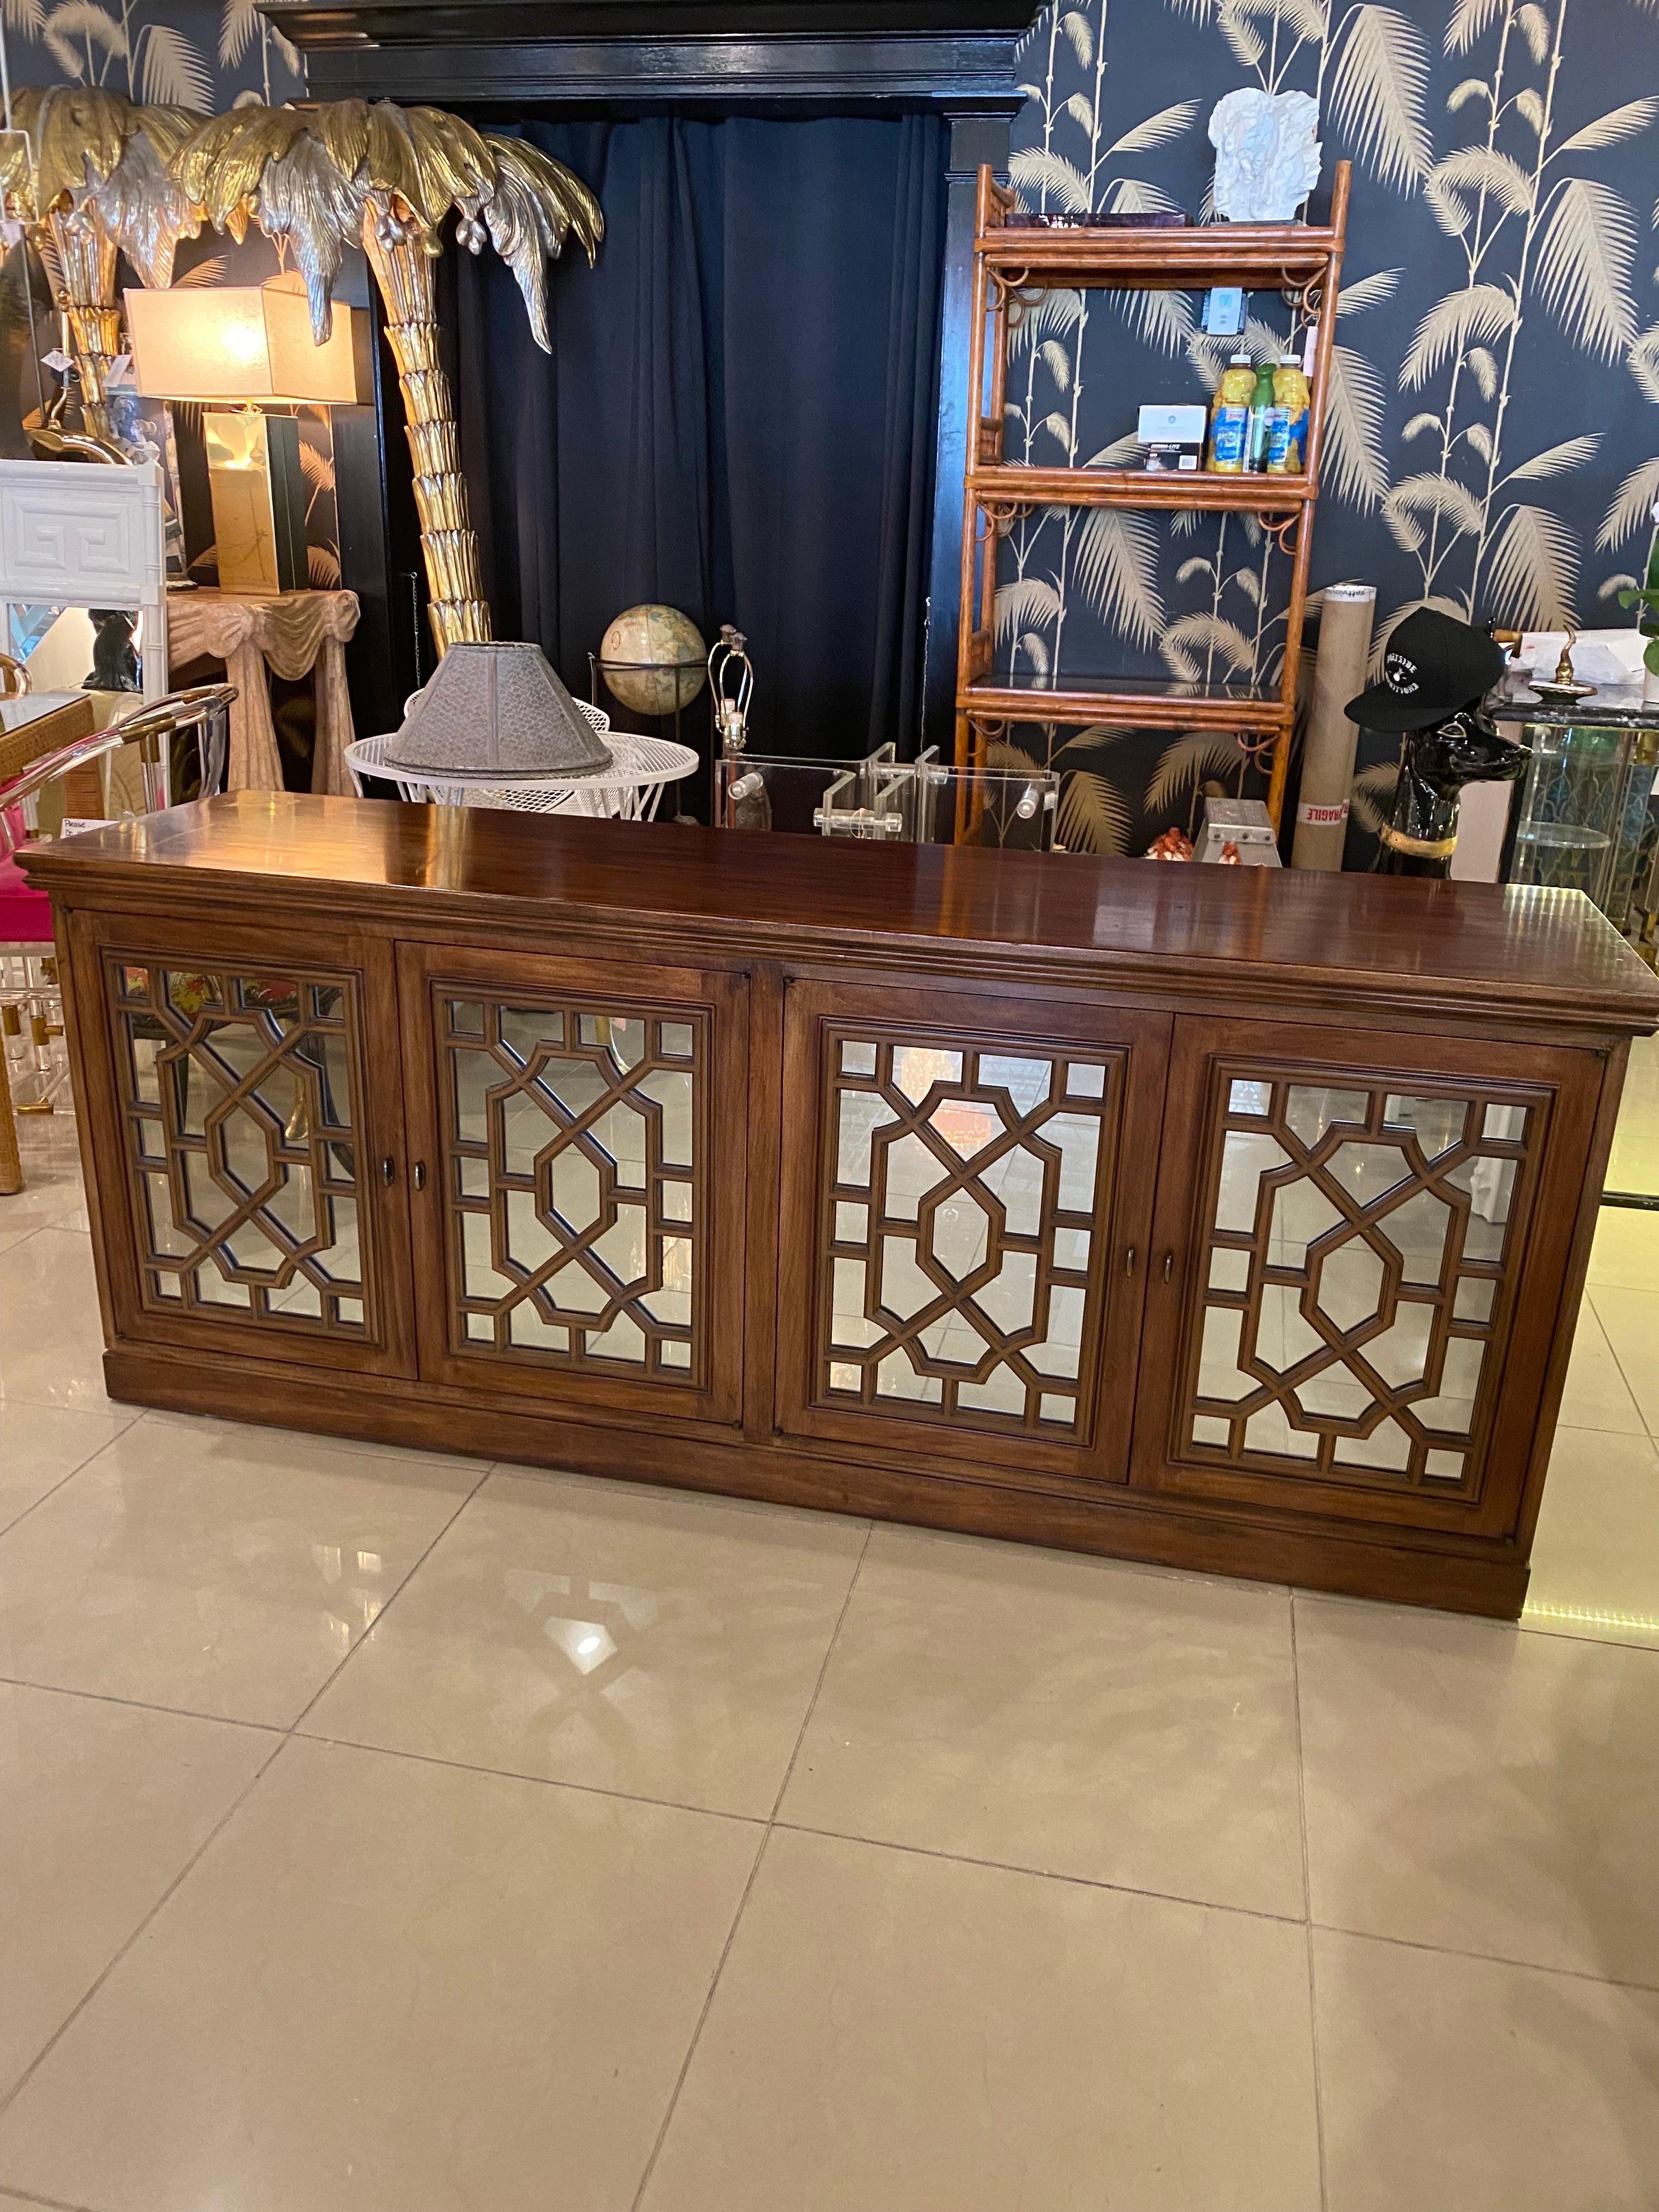 Vintage Wood Chinoiserie Fretwork Fret Mirrored Credenza Buffet Sideboard Doors For Sale 9